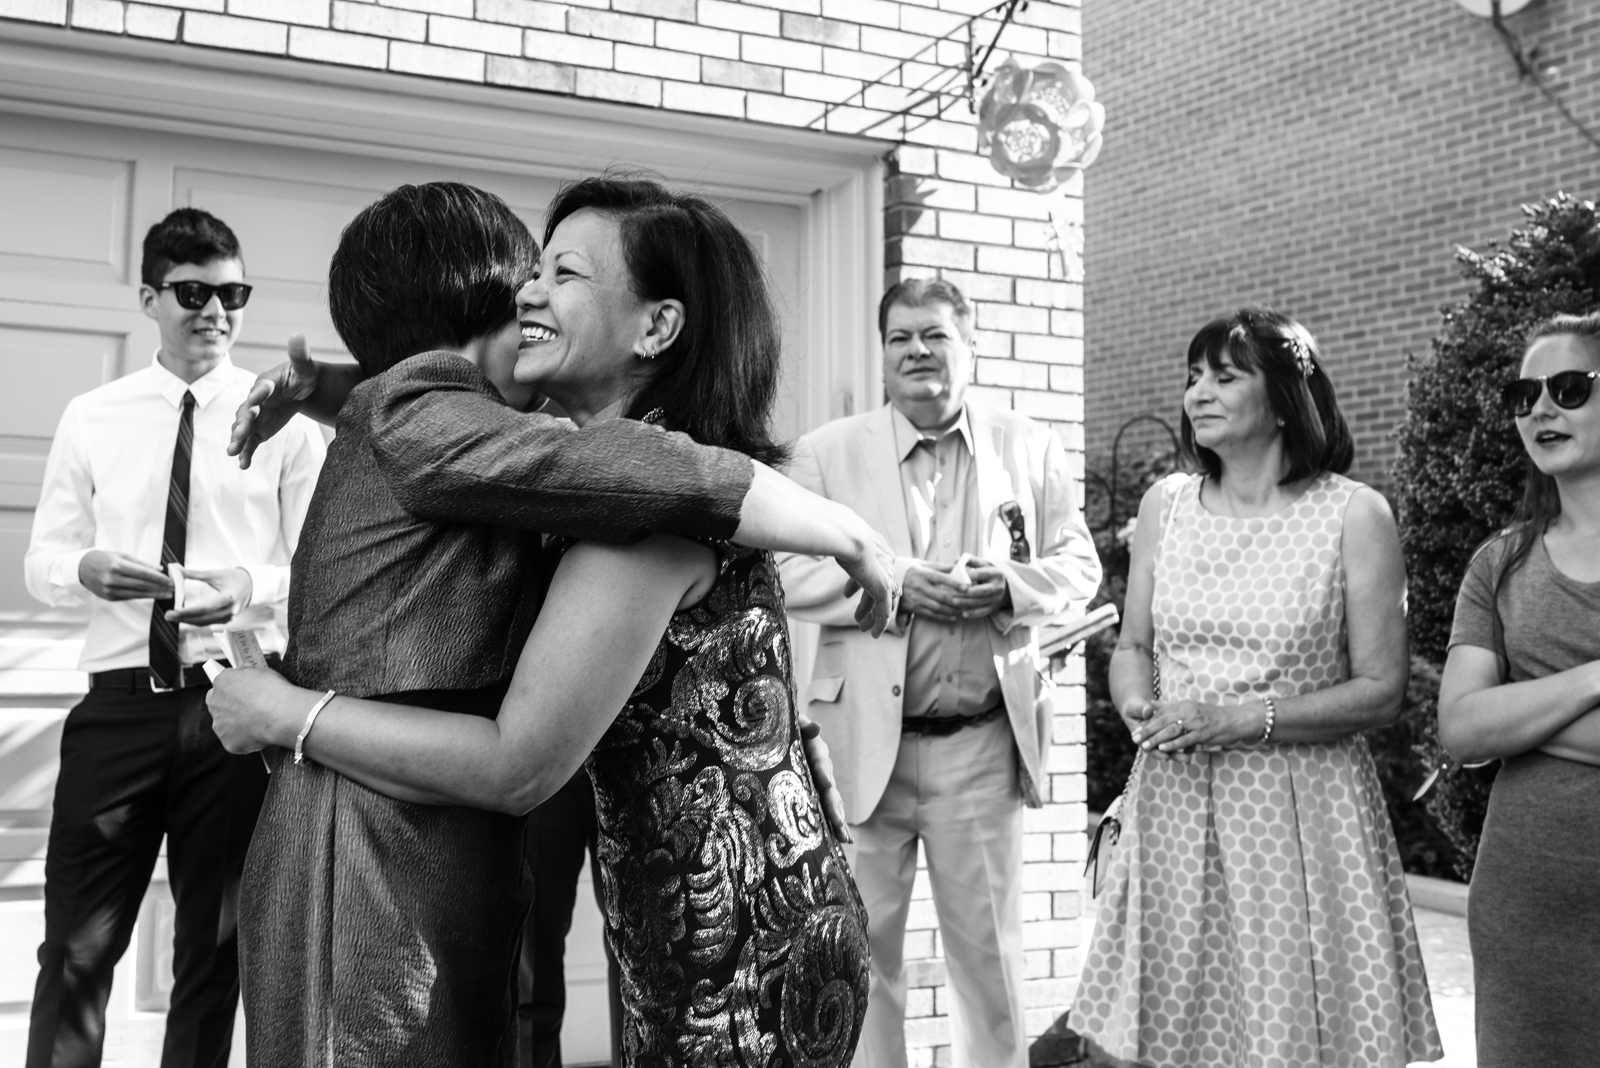 candid shot of the bride's mom hug guest in front of her house on the wedding day morning taken by documentary wedding photographer cafa liu